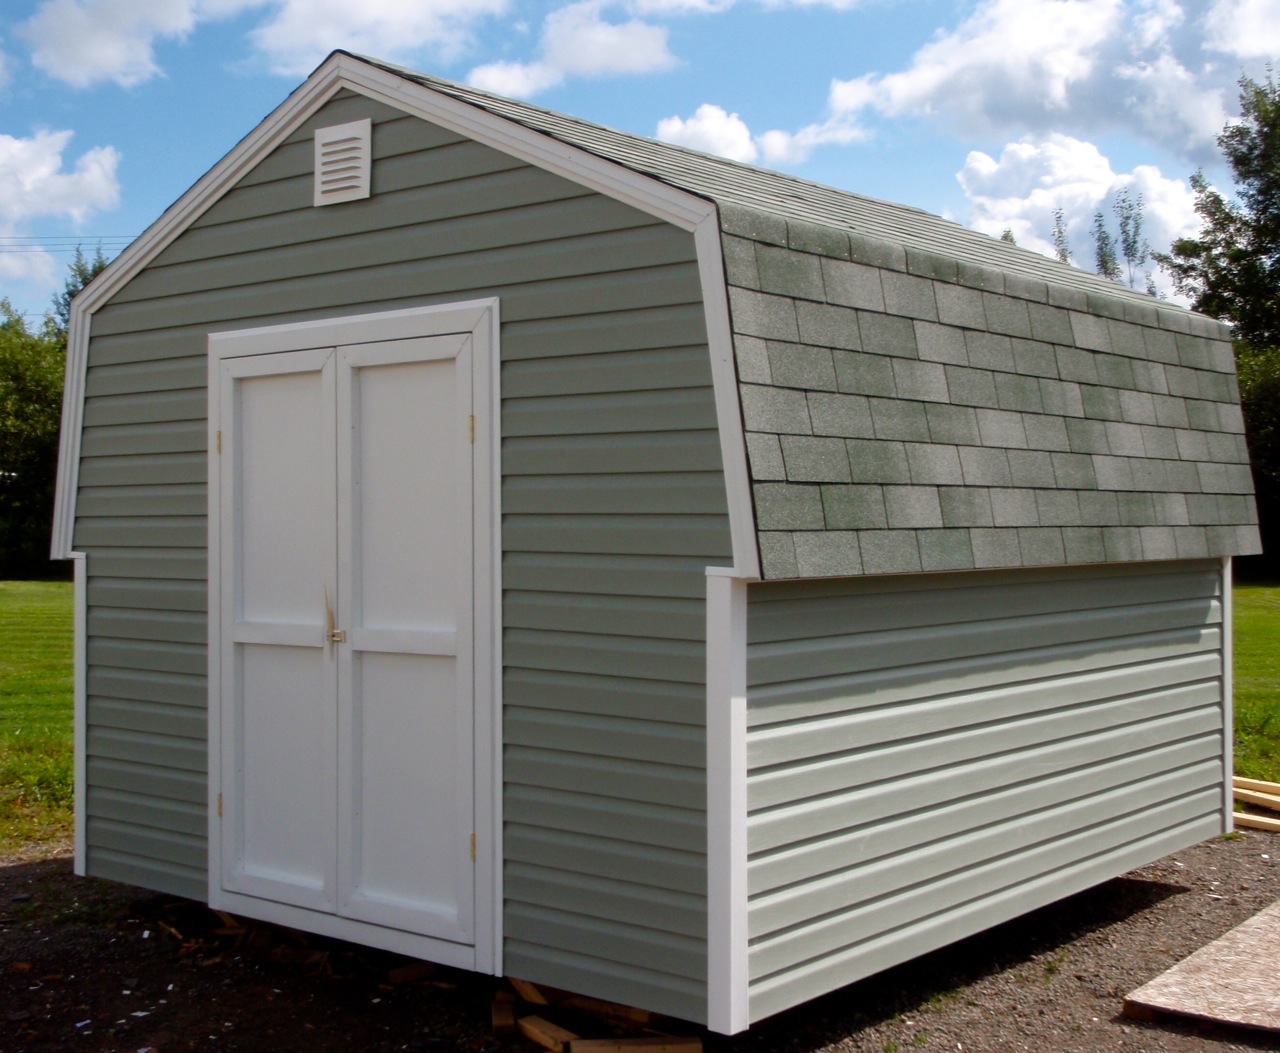 Shed Roof Garage Ideas - House Plans